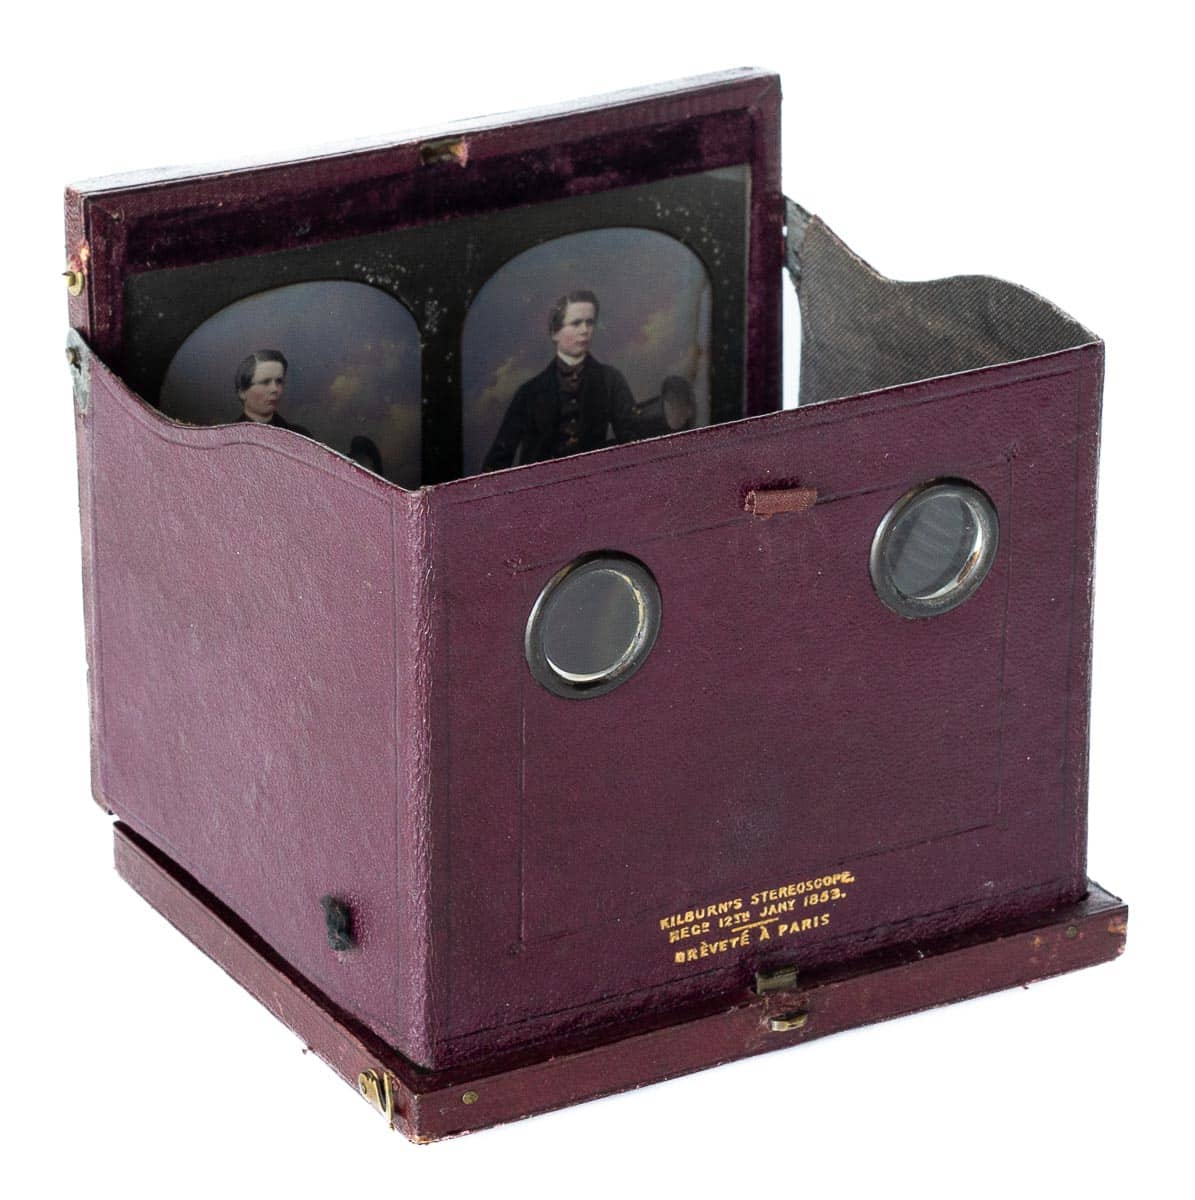 Kilburn viewing case with stereo daguerreotype